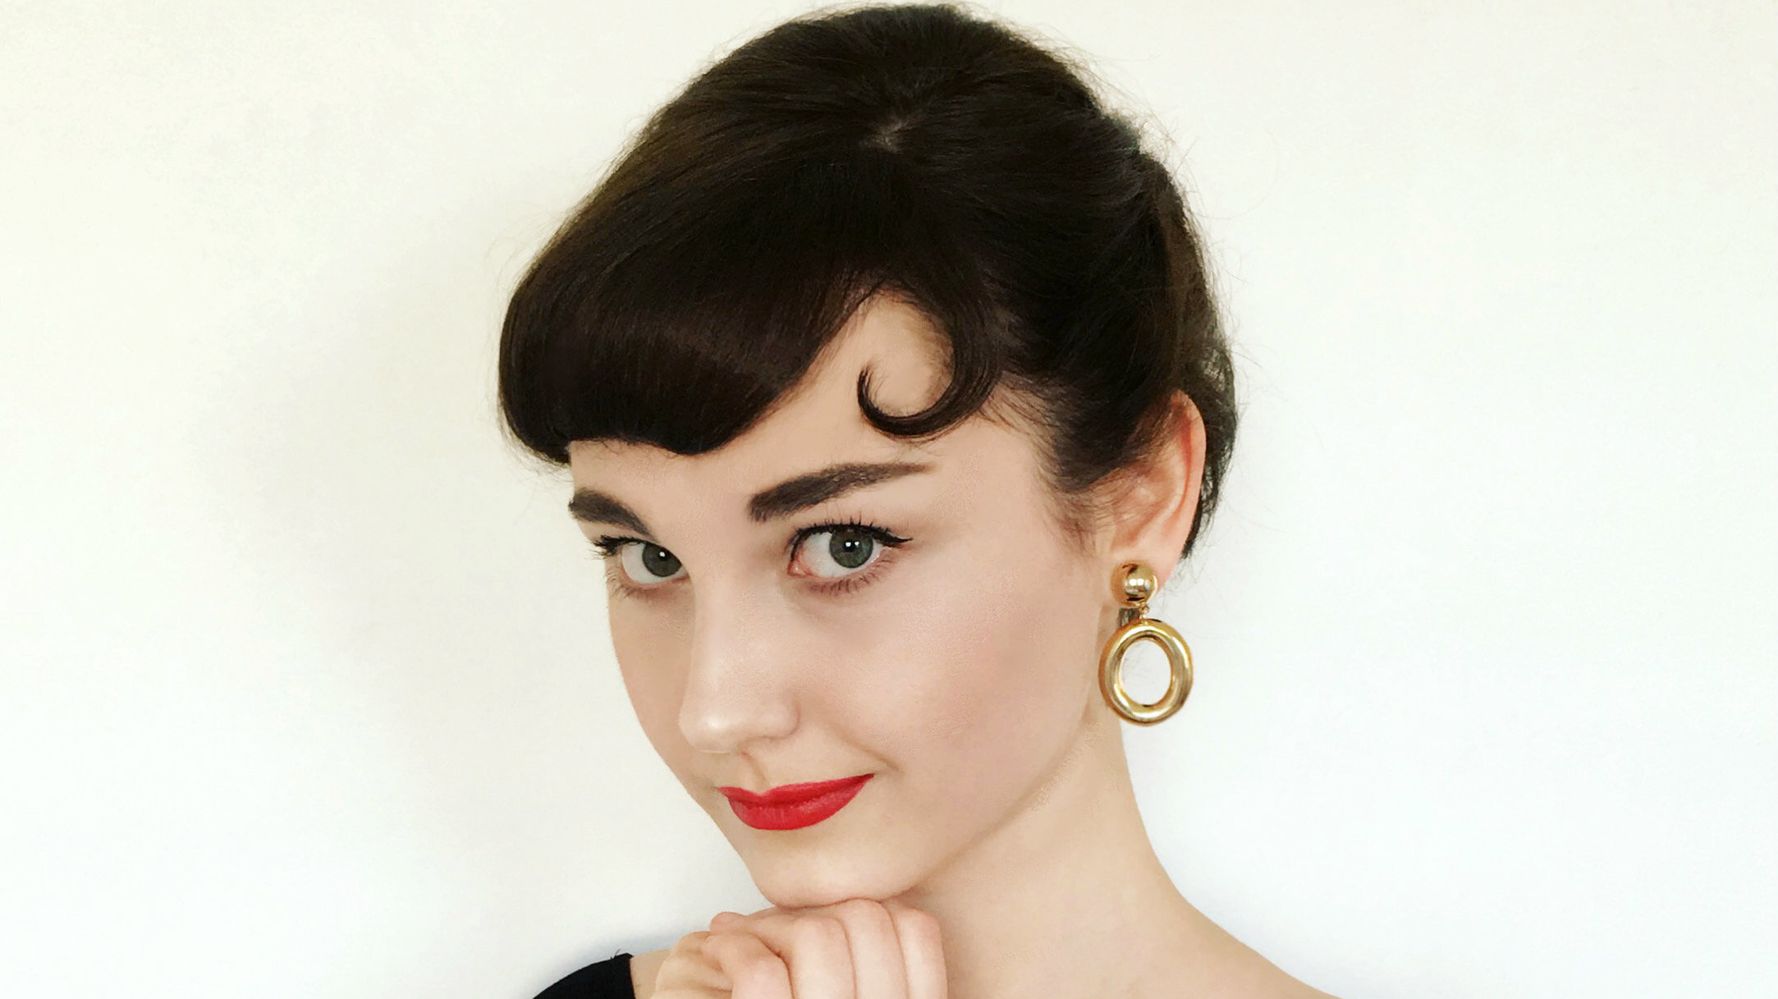 This 17 Year Old S Audrey Hepburn Makeup Transformation Will Leave You Speechless Huffpost Life